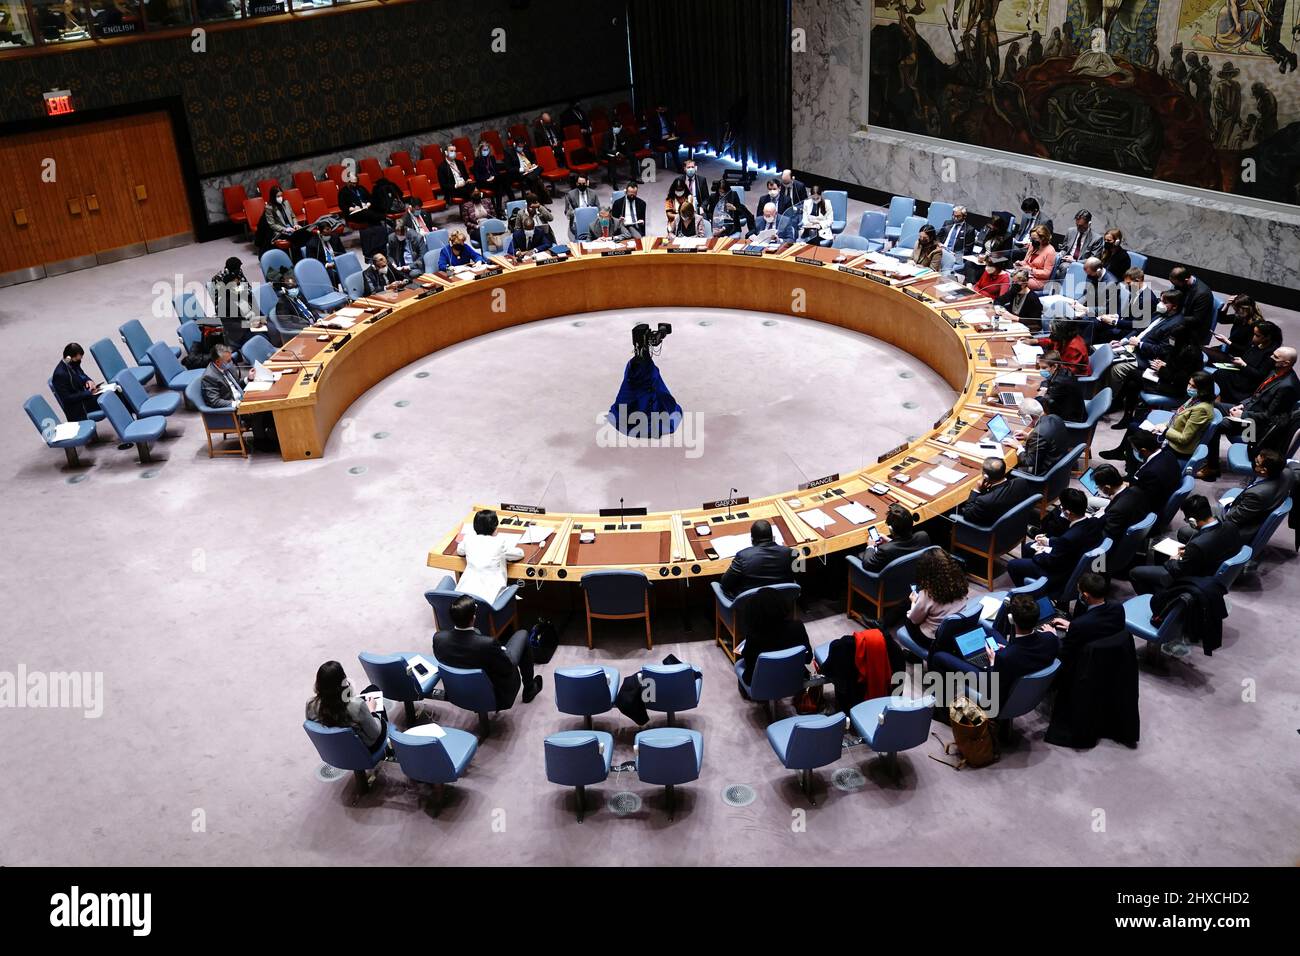 A general view of the United Nations Security Council meeting on Threats to International Peace and Security, following Russia's invasion of Ukraine, in New York City, U.S. March 11, 2022. REUTERS/Carlo Allegri Stock Photo